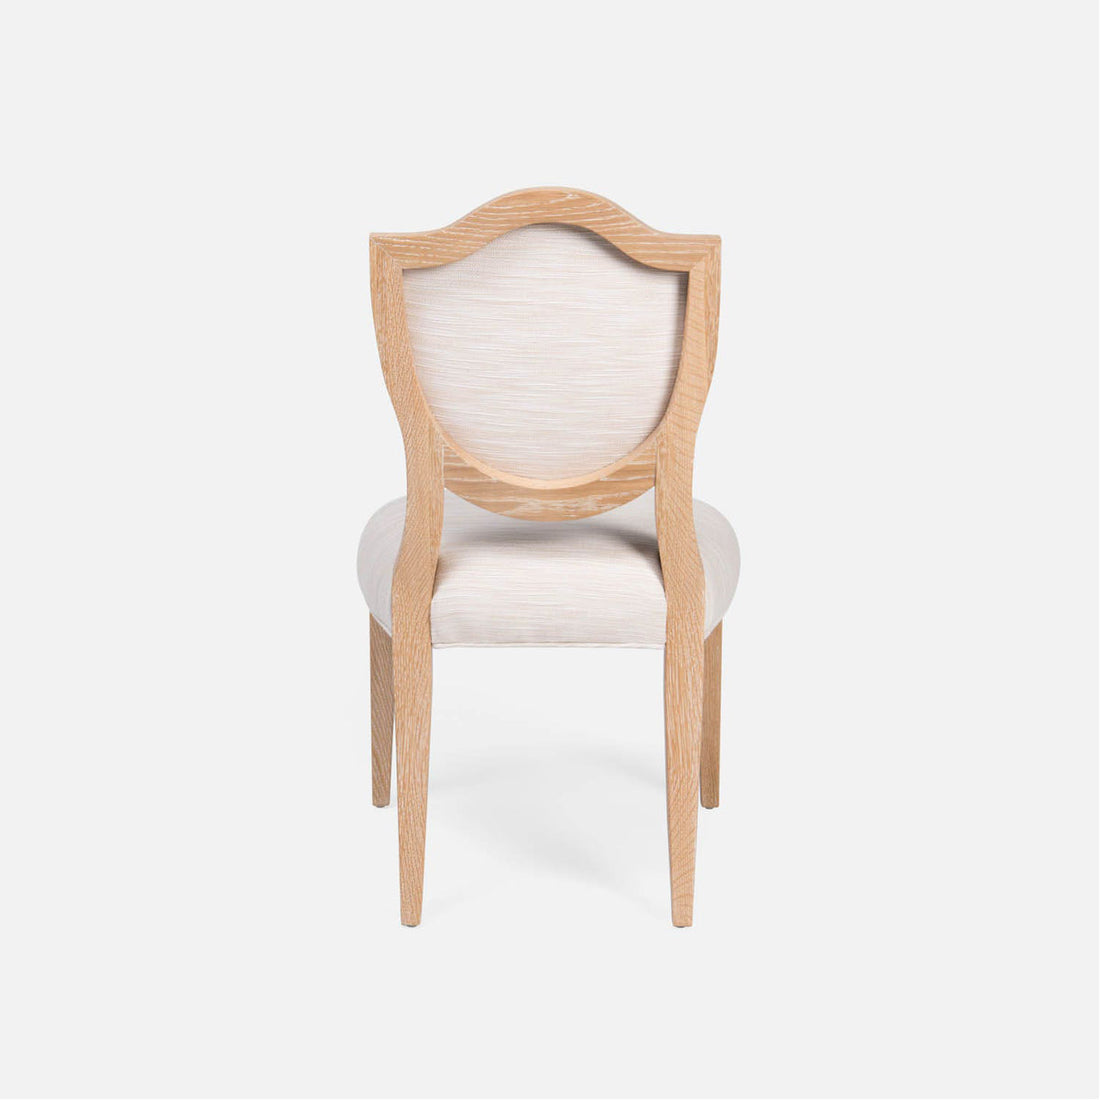 Made Goods Micah Upholstered Medallion Dining Chair in Klein Cotton